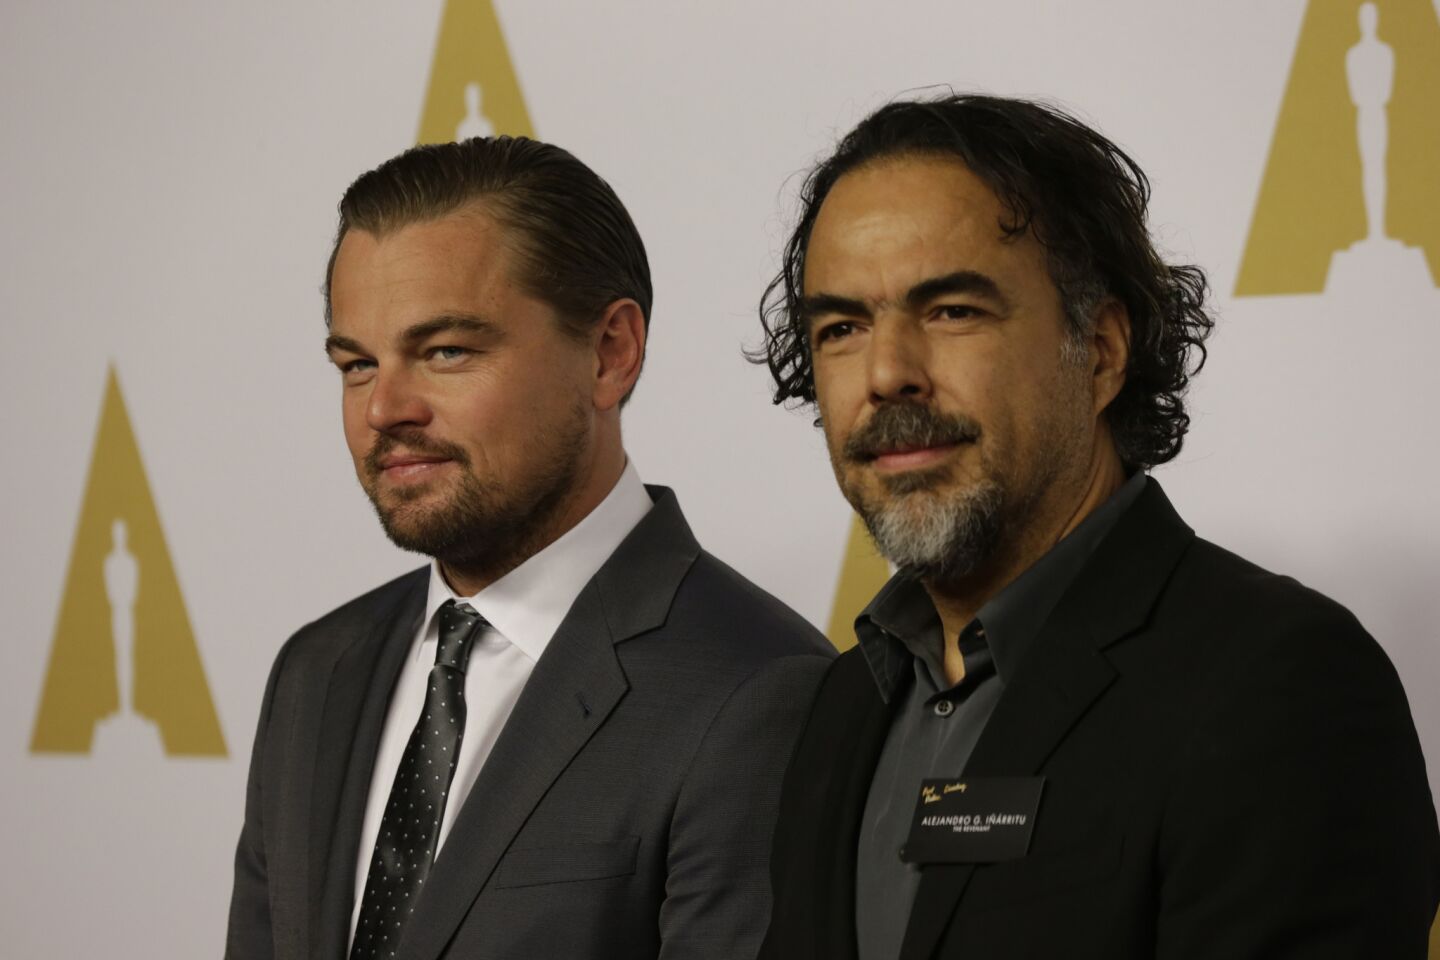 Leonardo DiCaprio, left, and Alejandro G. Inarritu arrive for the 88th annual Academy Awards luncheon at the Beverly Hilton Hotel.